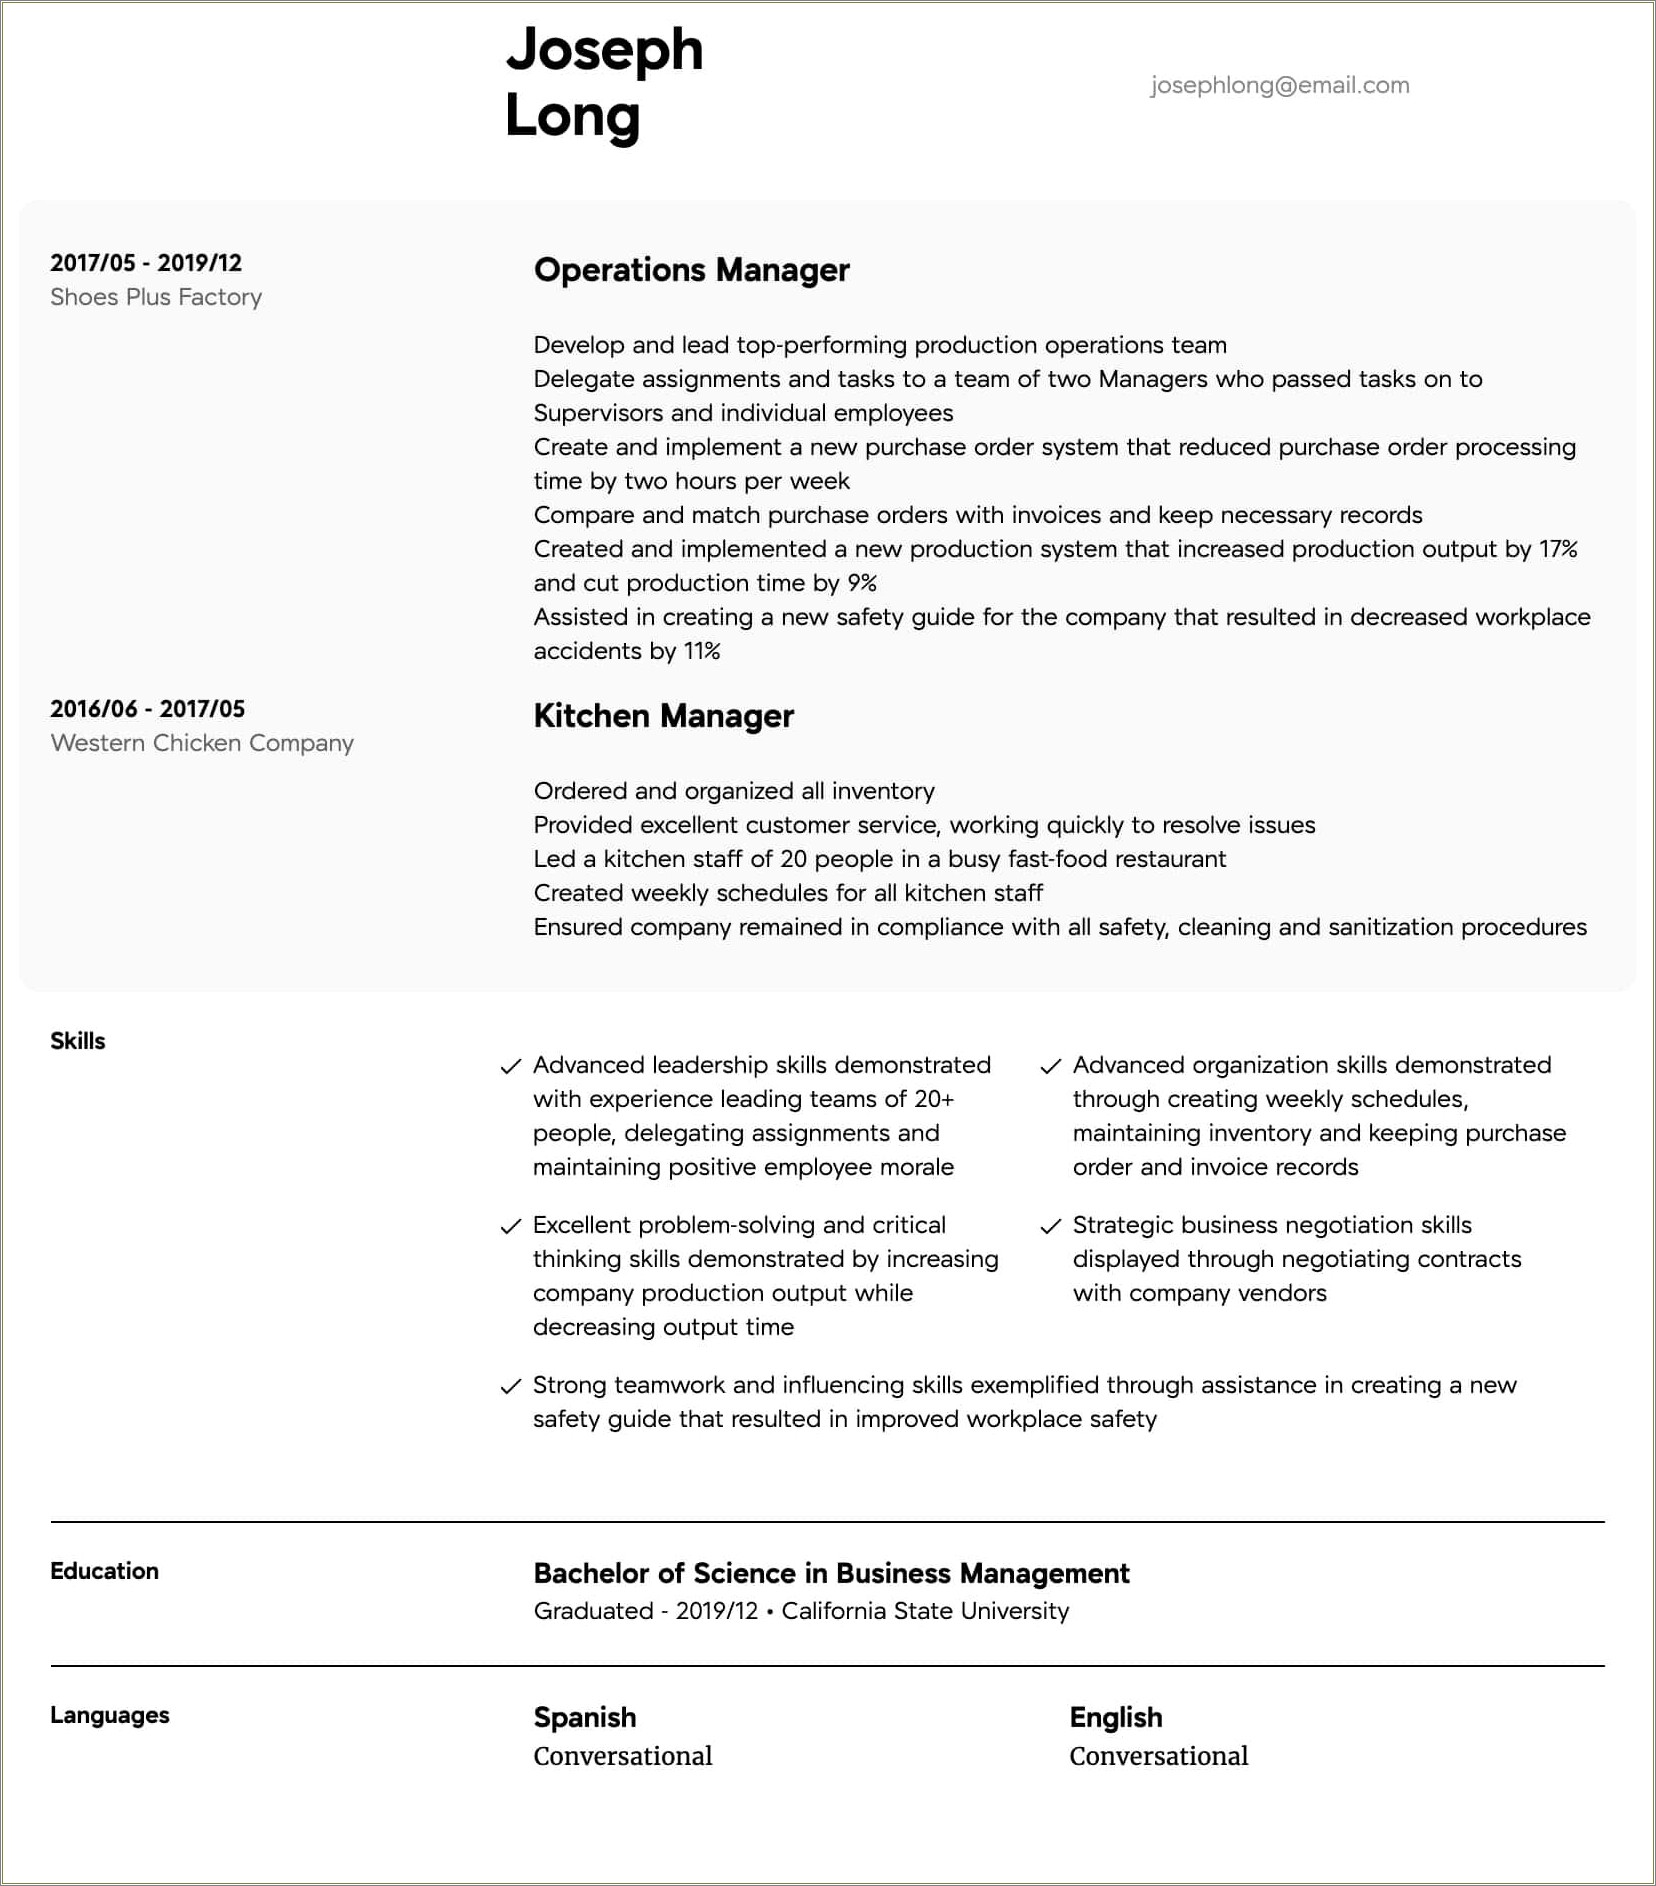 Examples Of Critical Thinking Skills For Resume